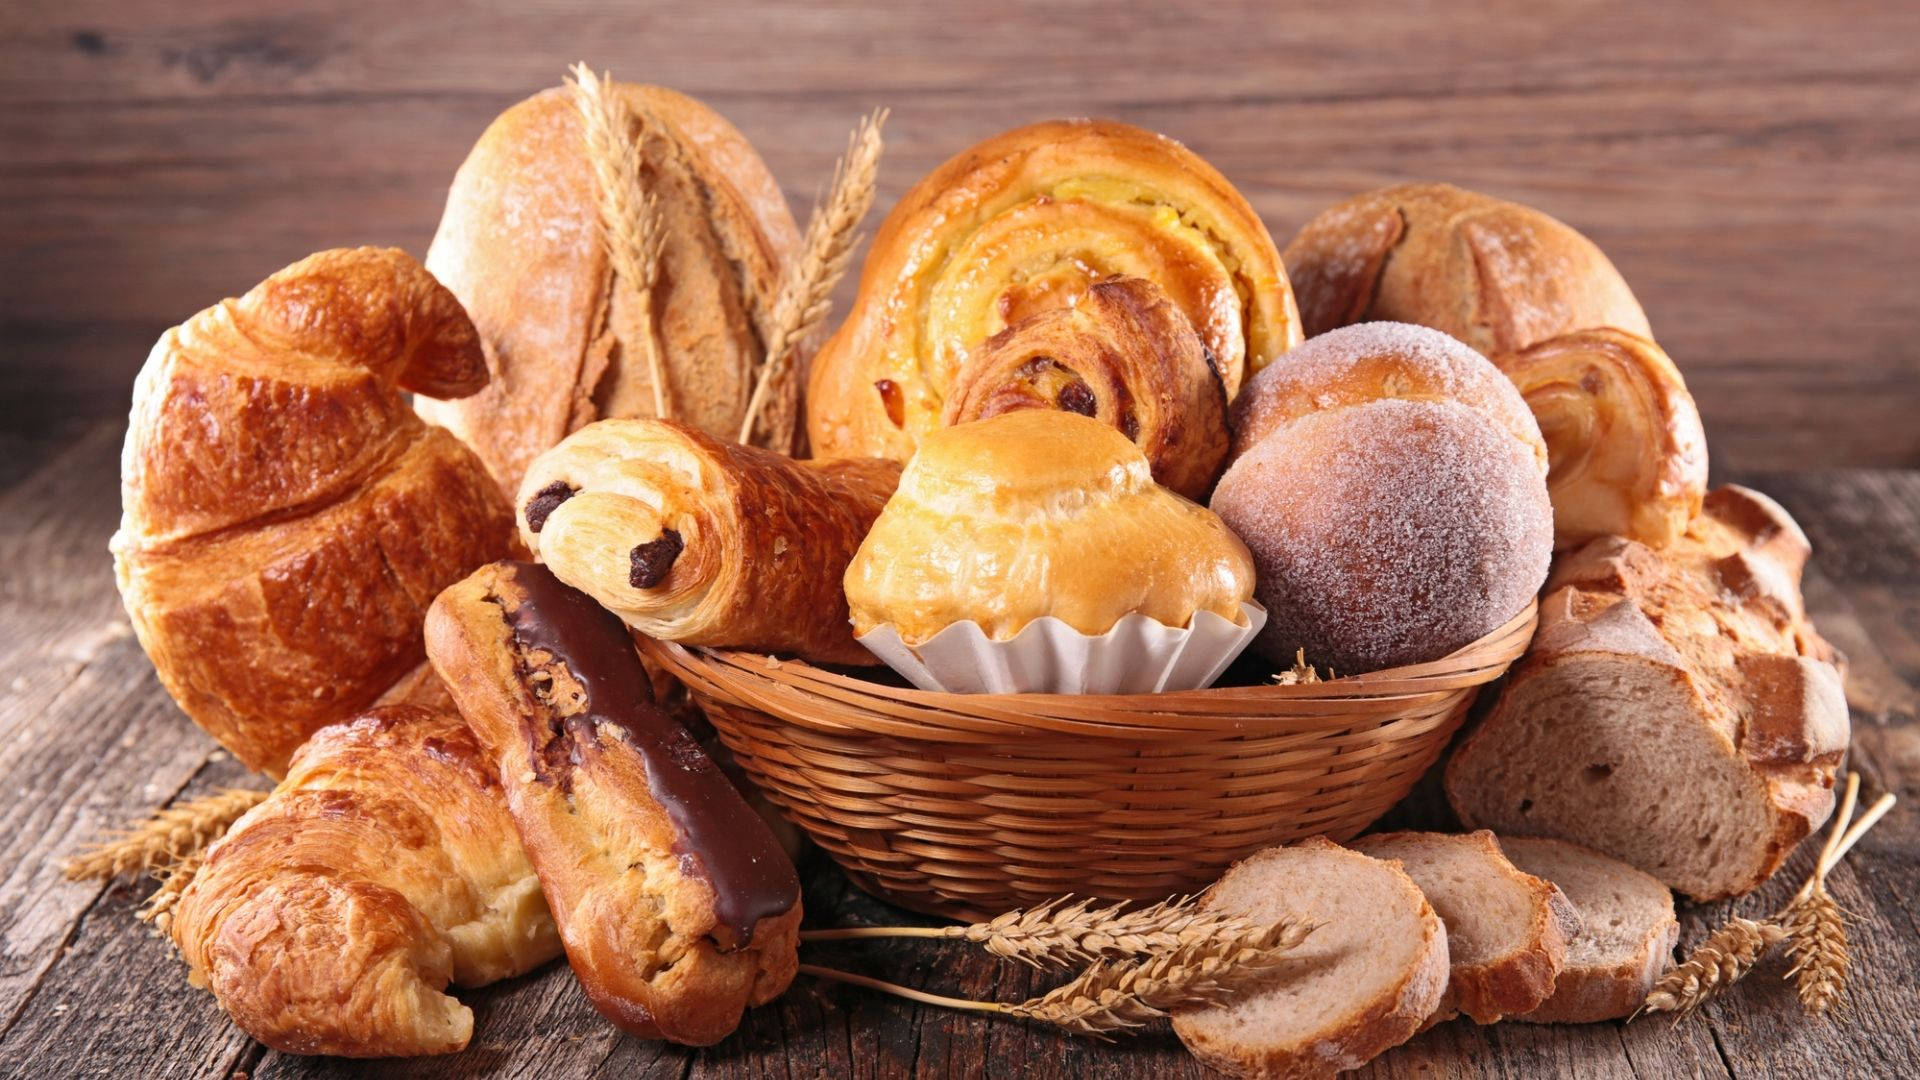 A Basket Overloaded With Artisan Breads